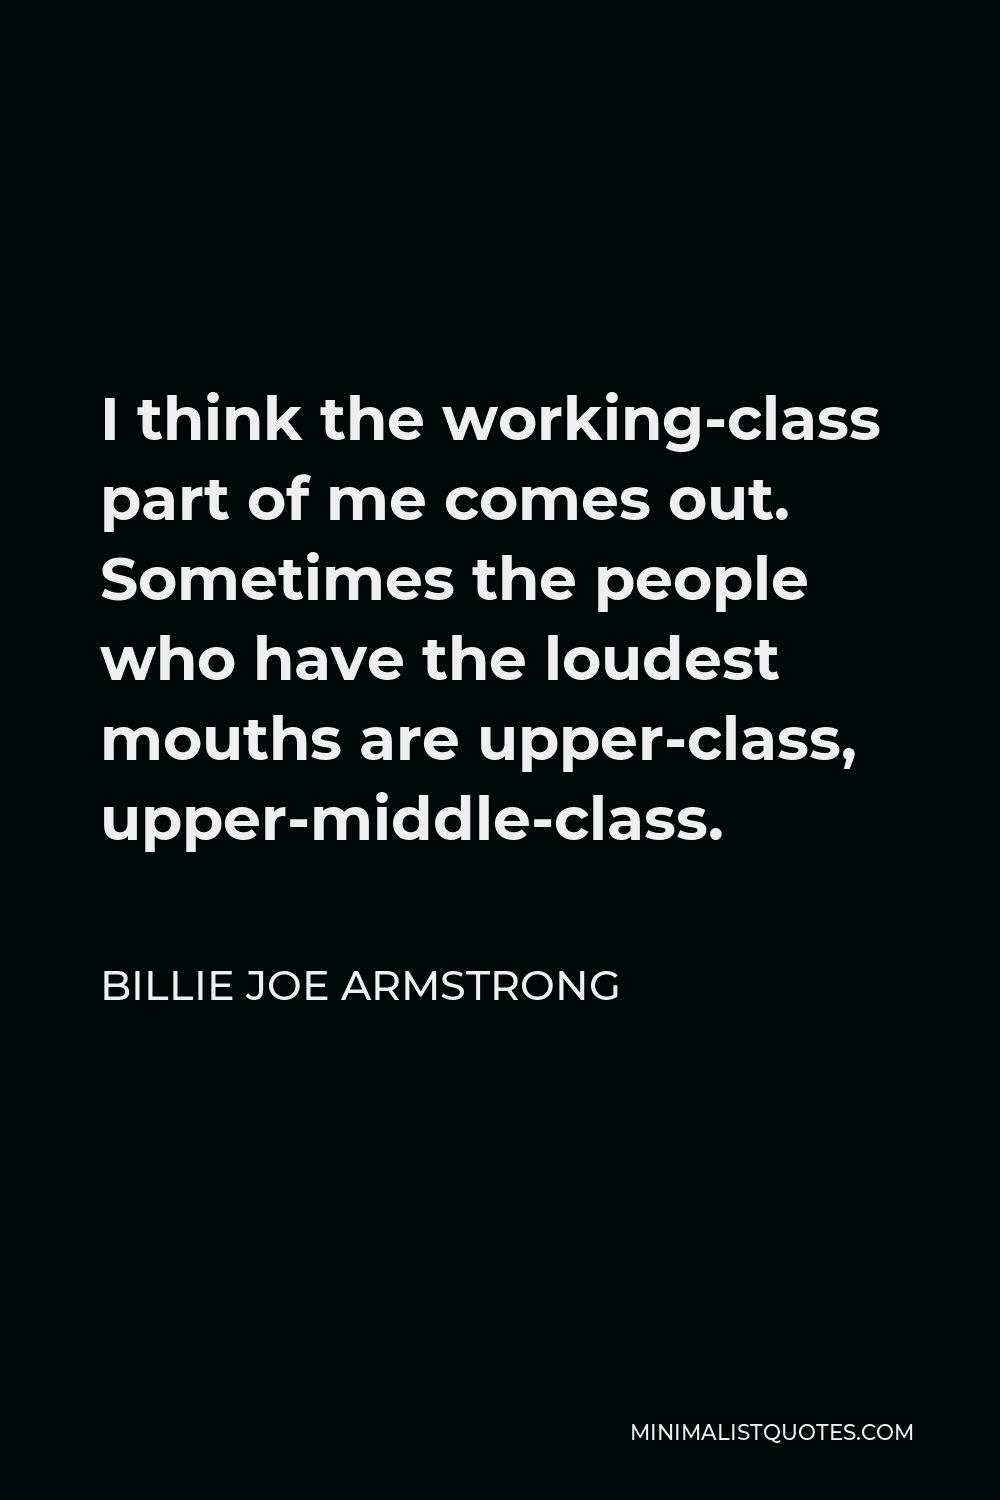 Billie Joe Armstrong Quote - I think the working-class part of me comes out. Sometimes the people who have the loudest mouths are upper-class, upper-middle-class.